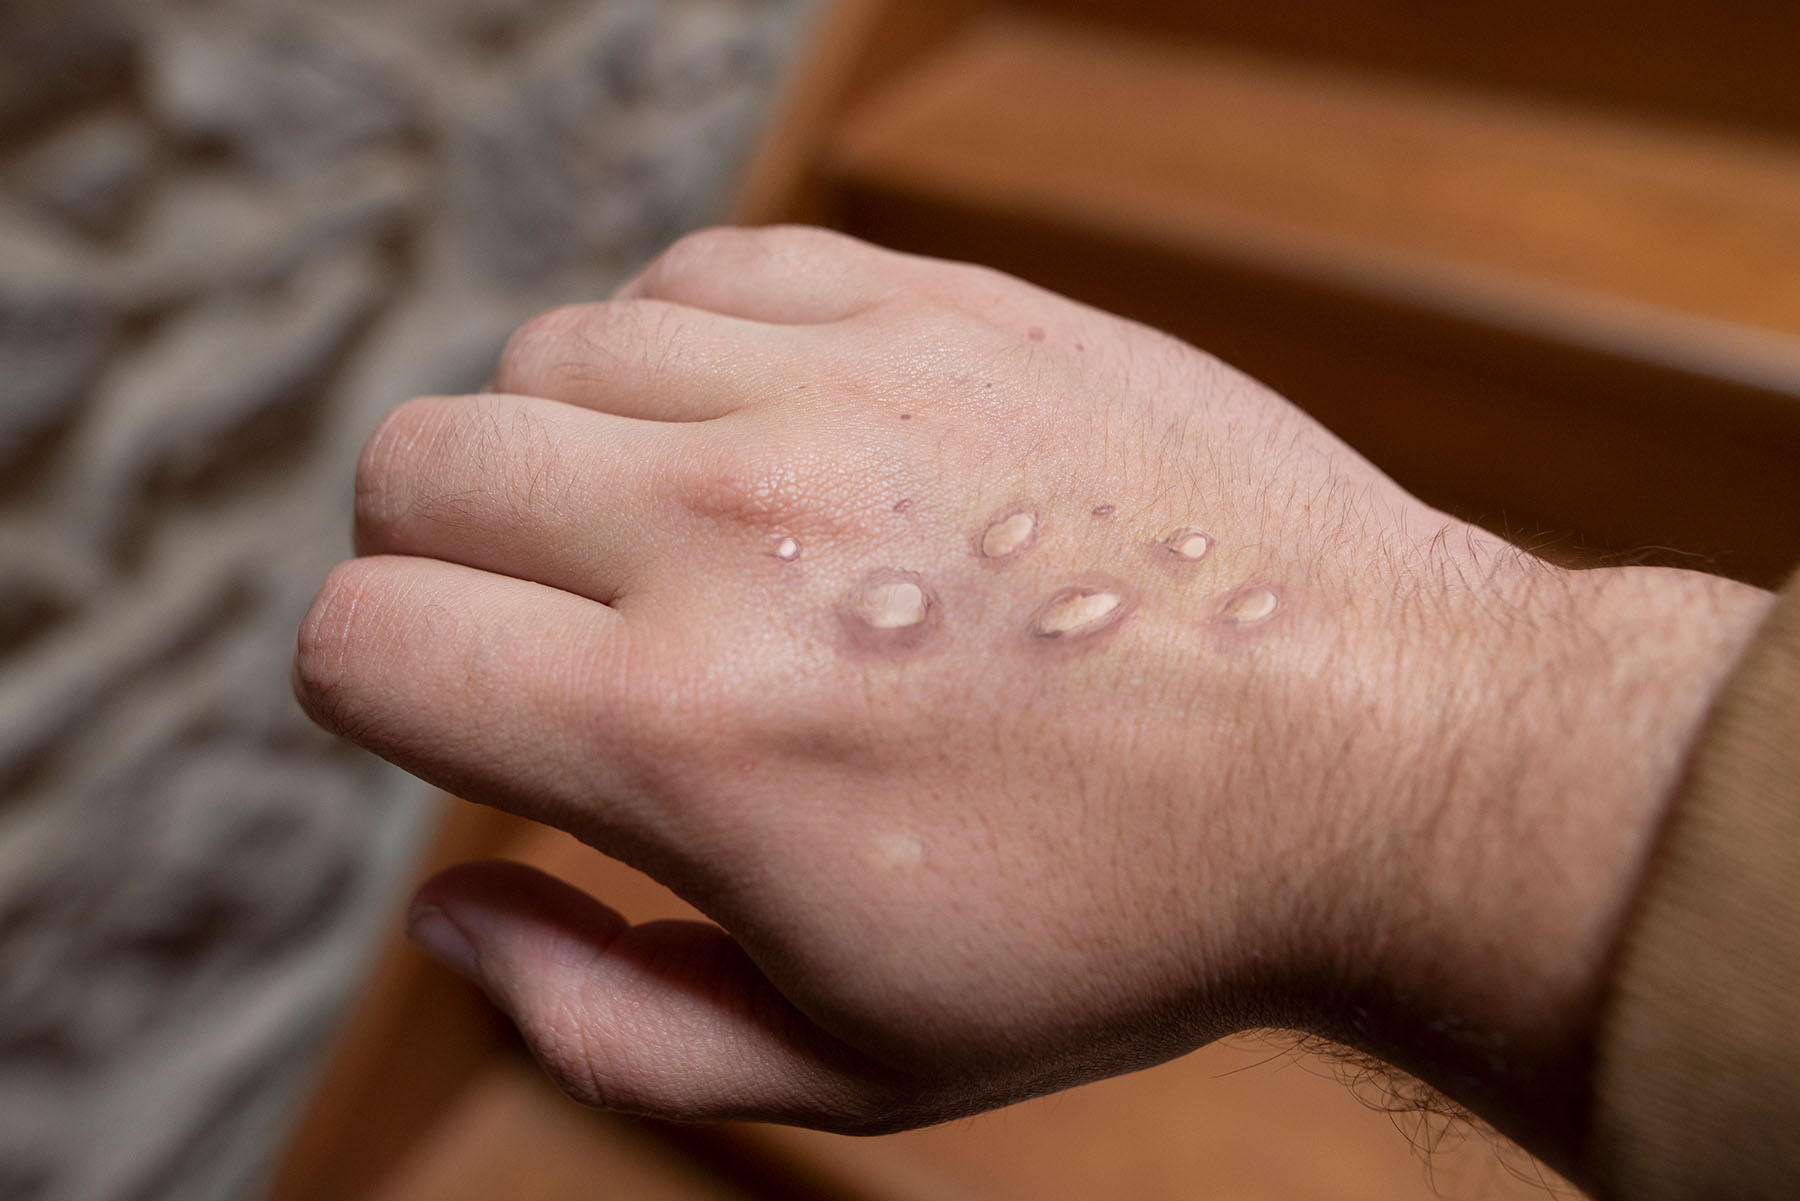 monkeypox lesions on back of hand